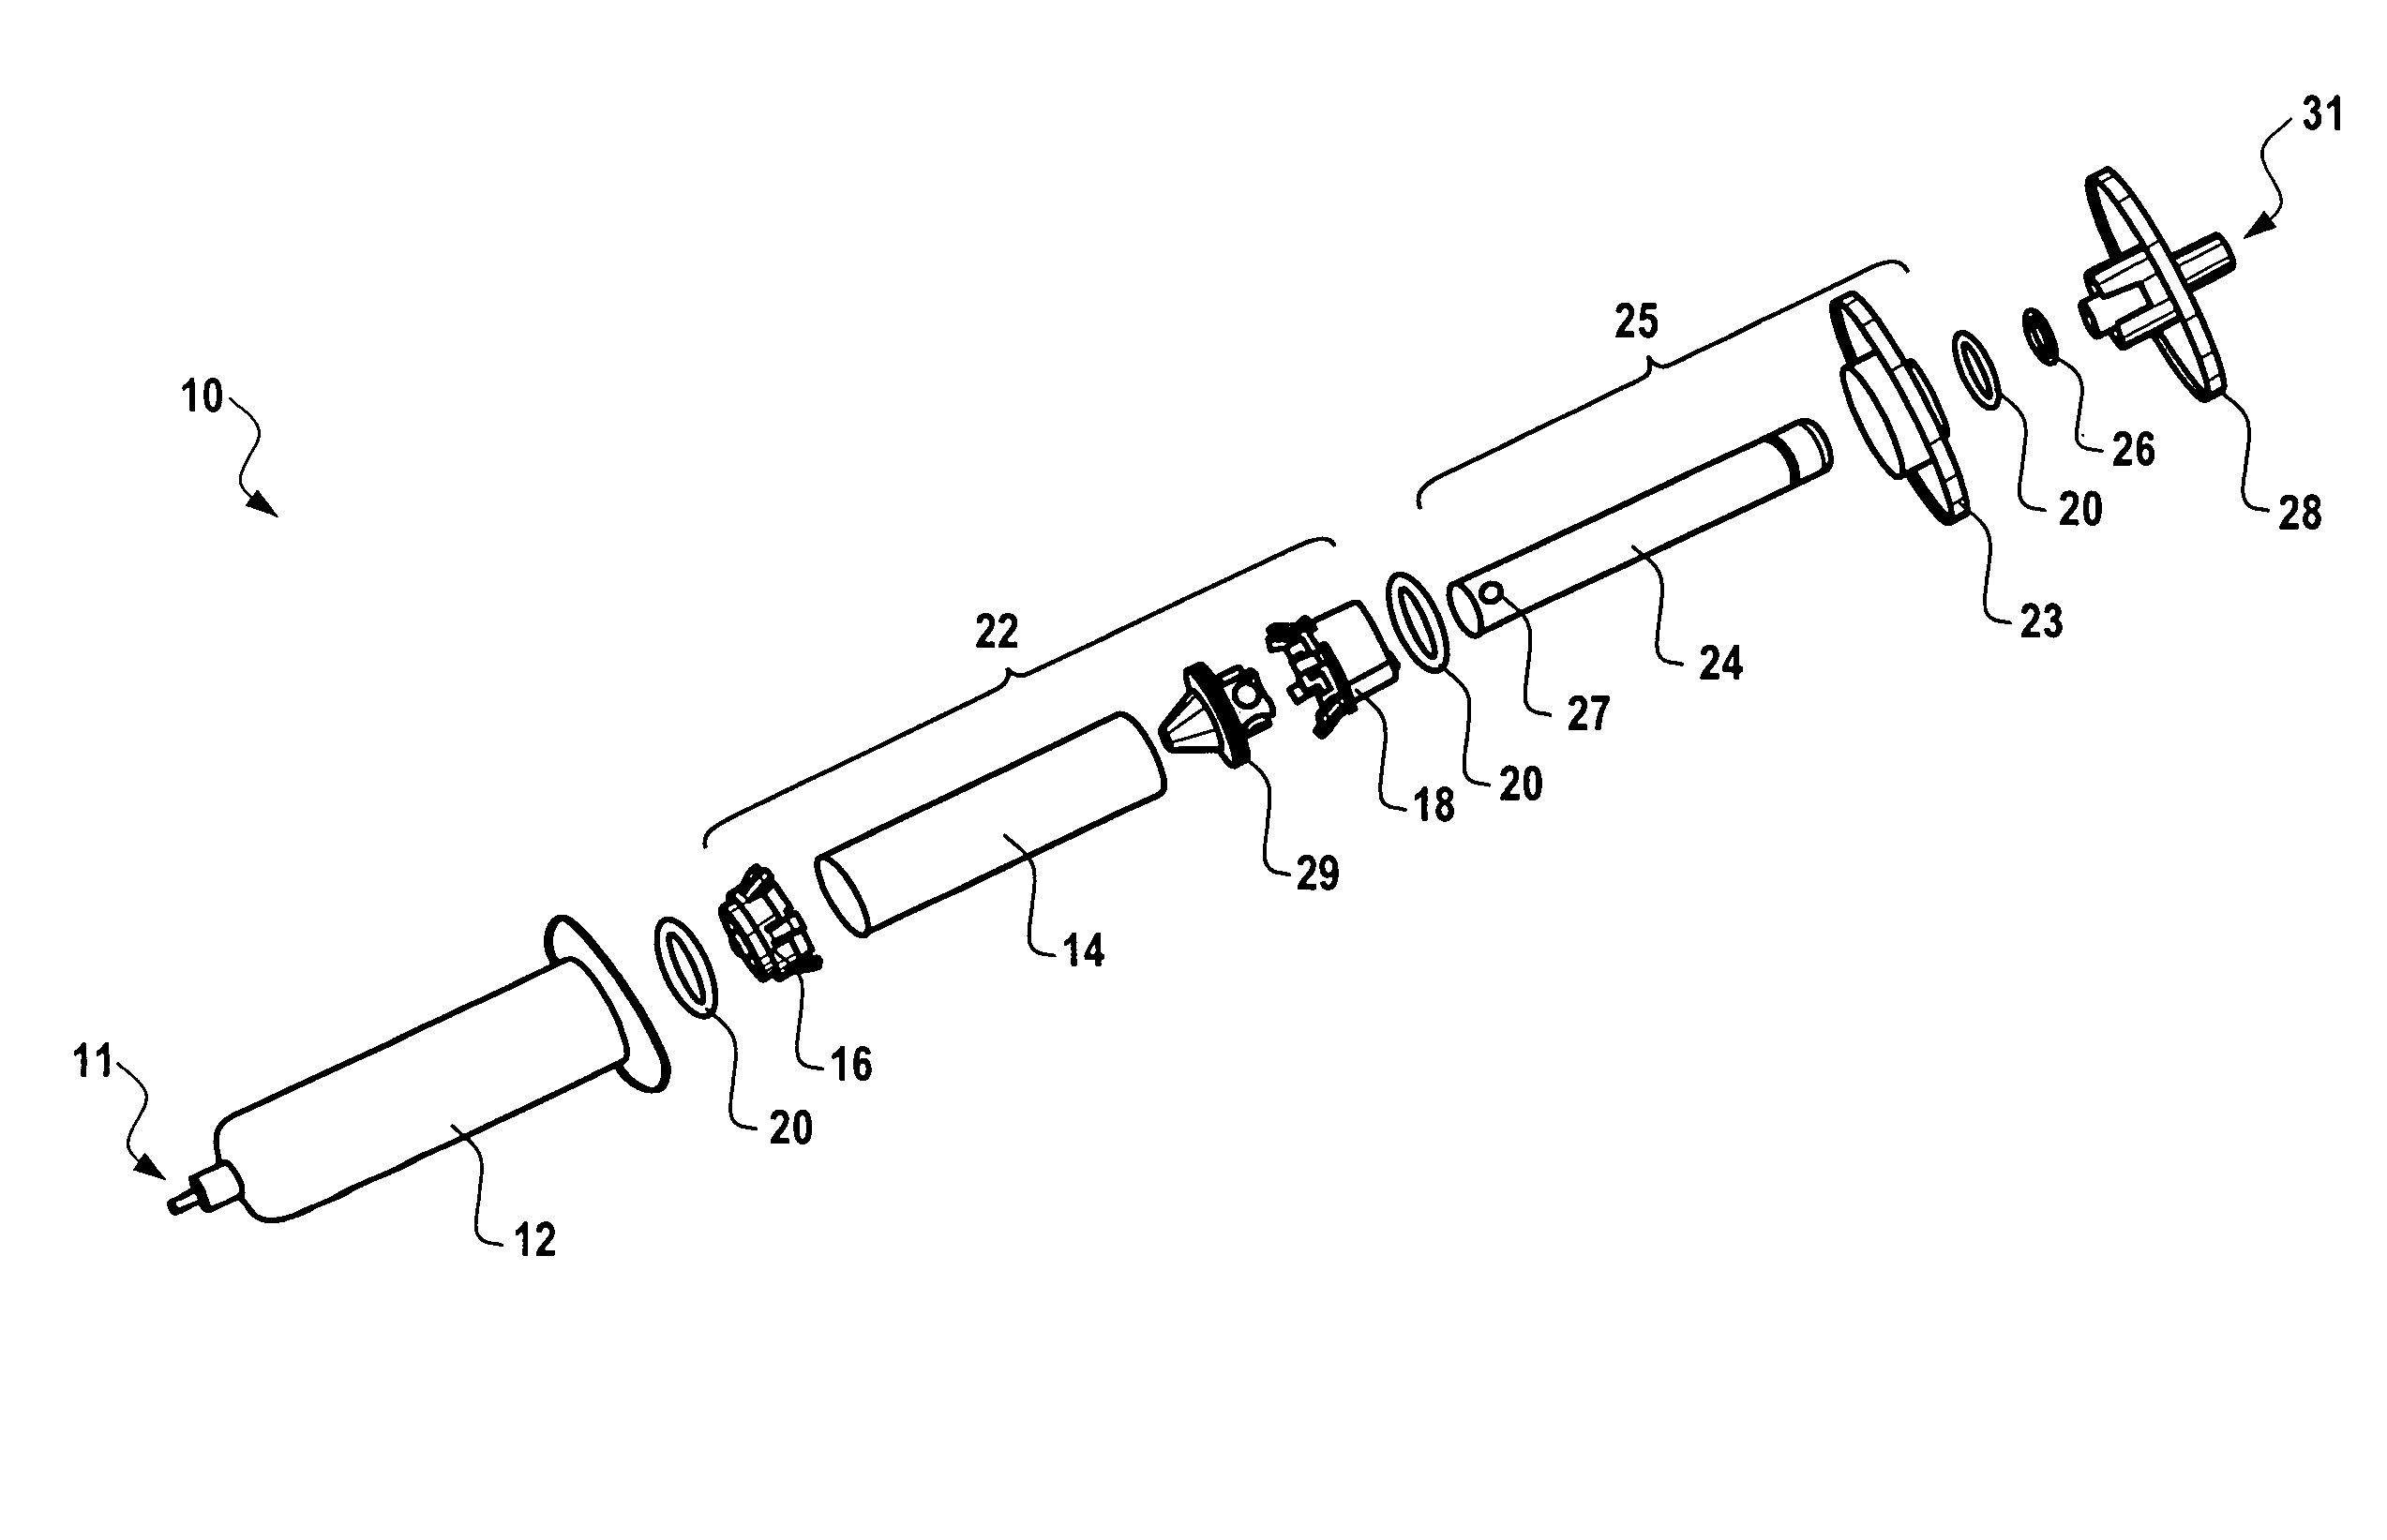 Autologus tissue harvesting and irrigation device